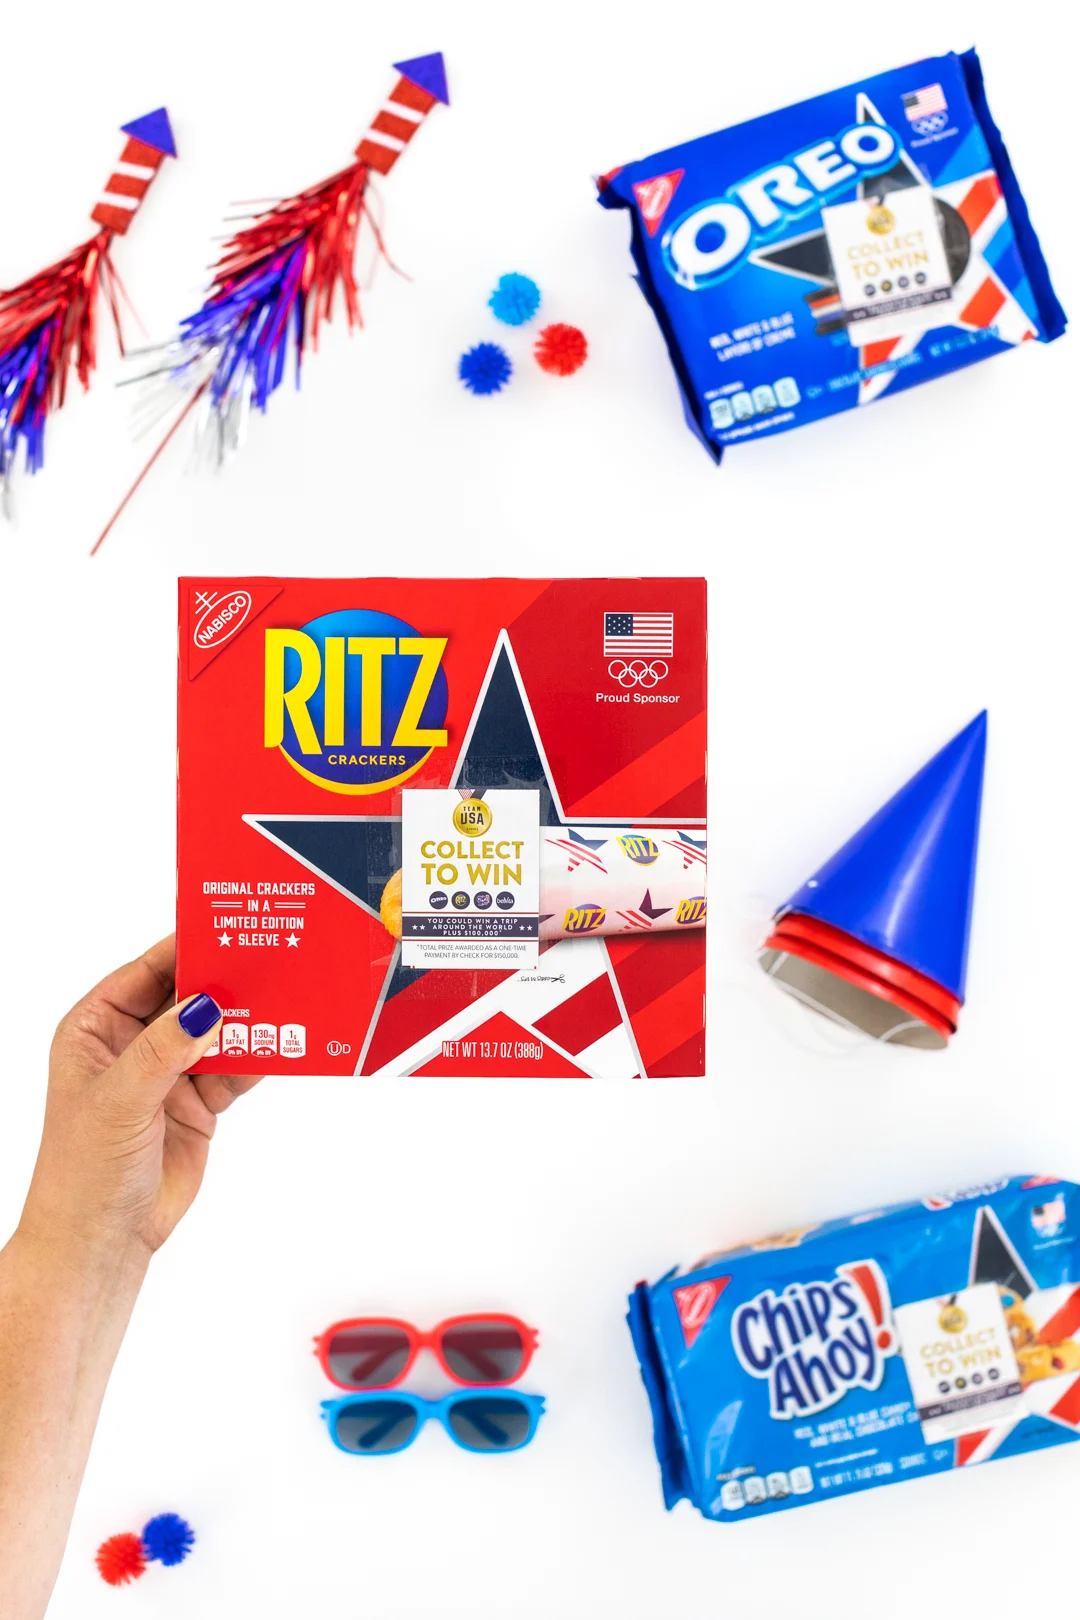 Ritz cracker box with latest promo on top